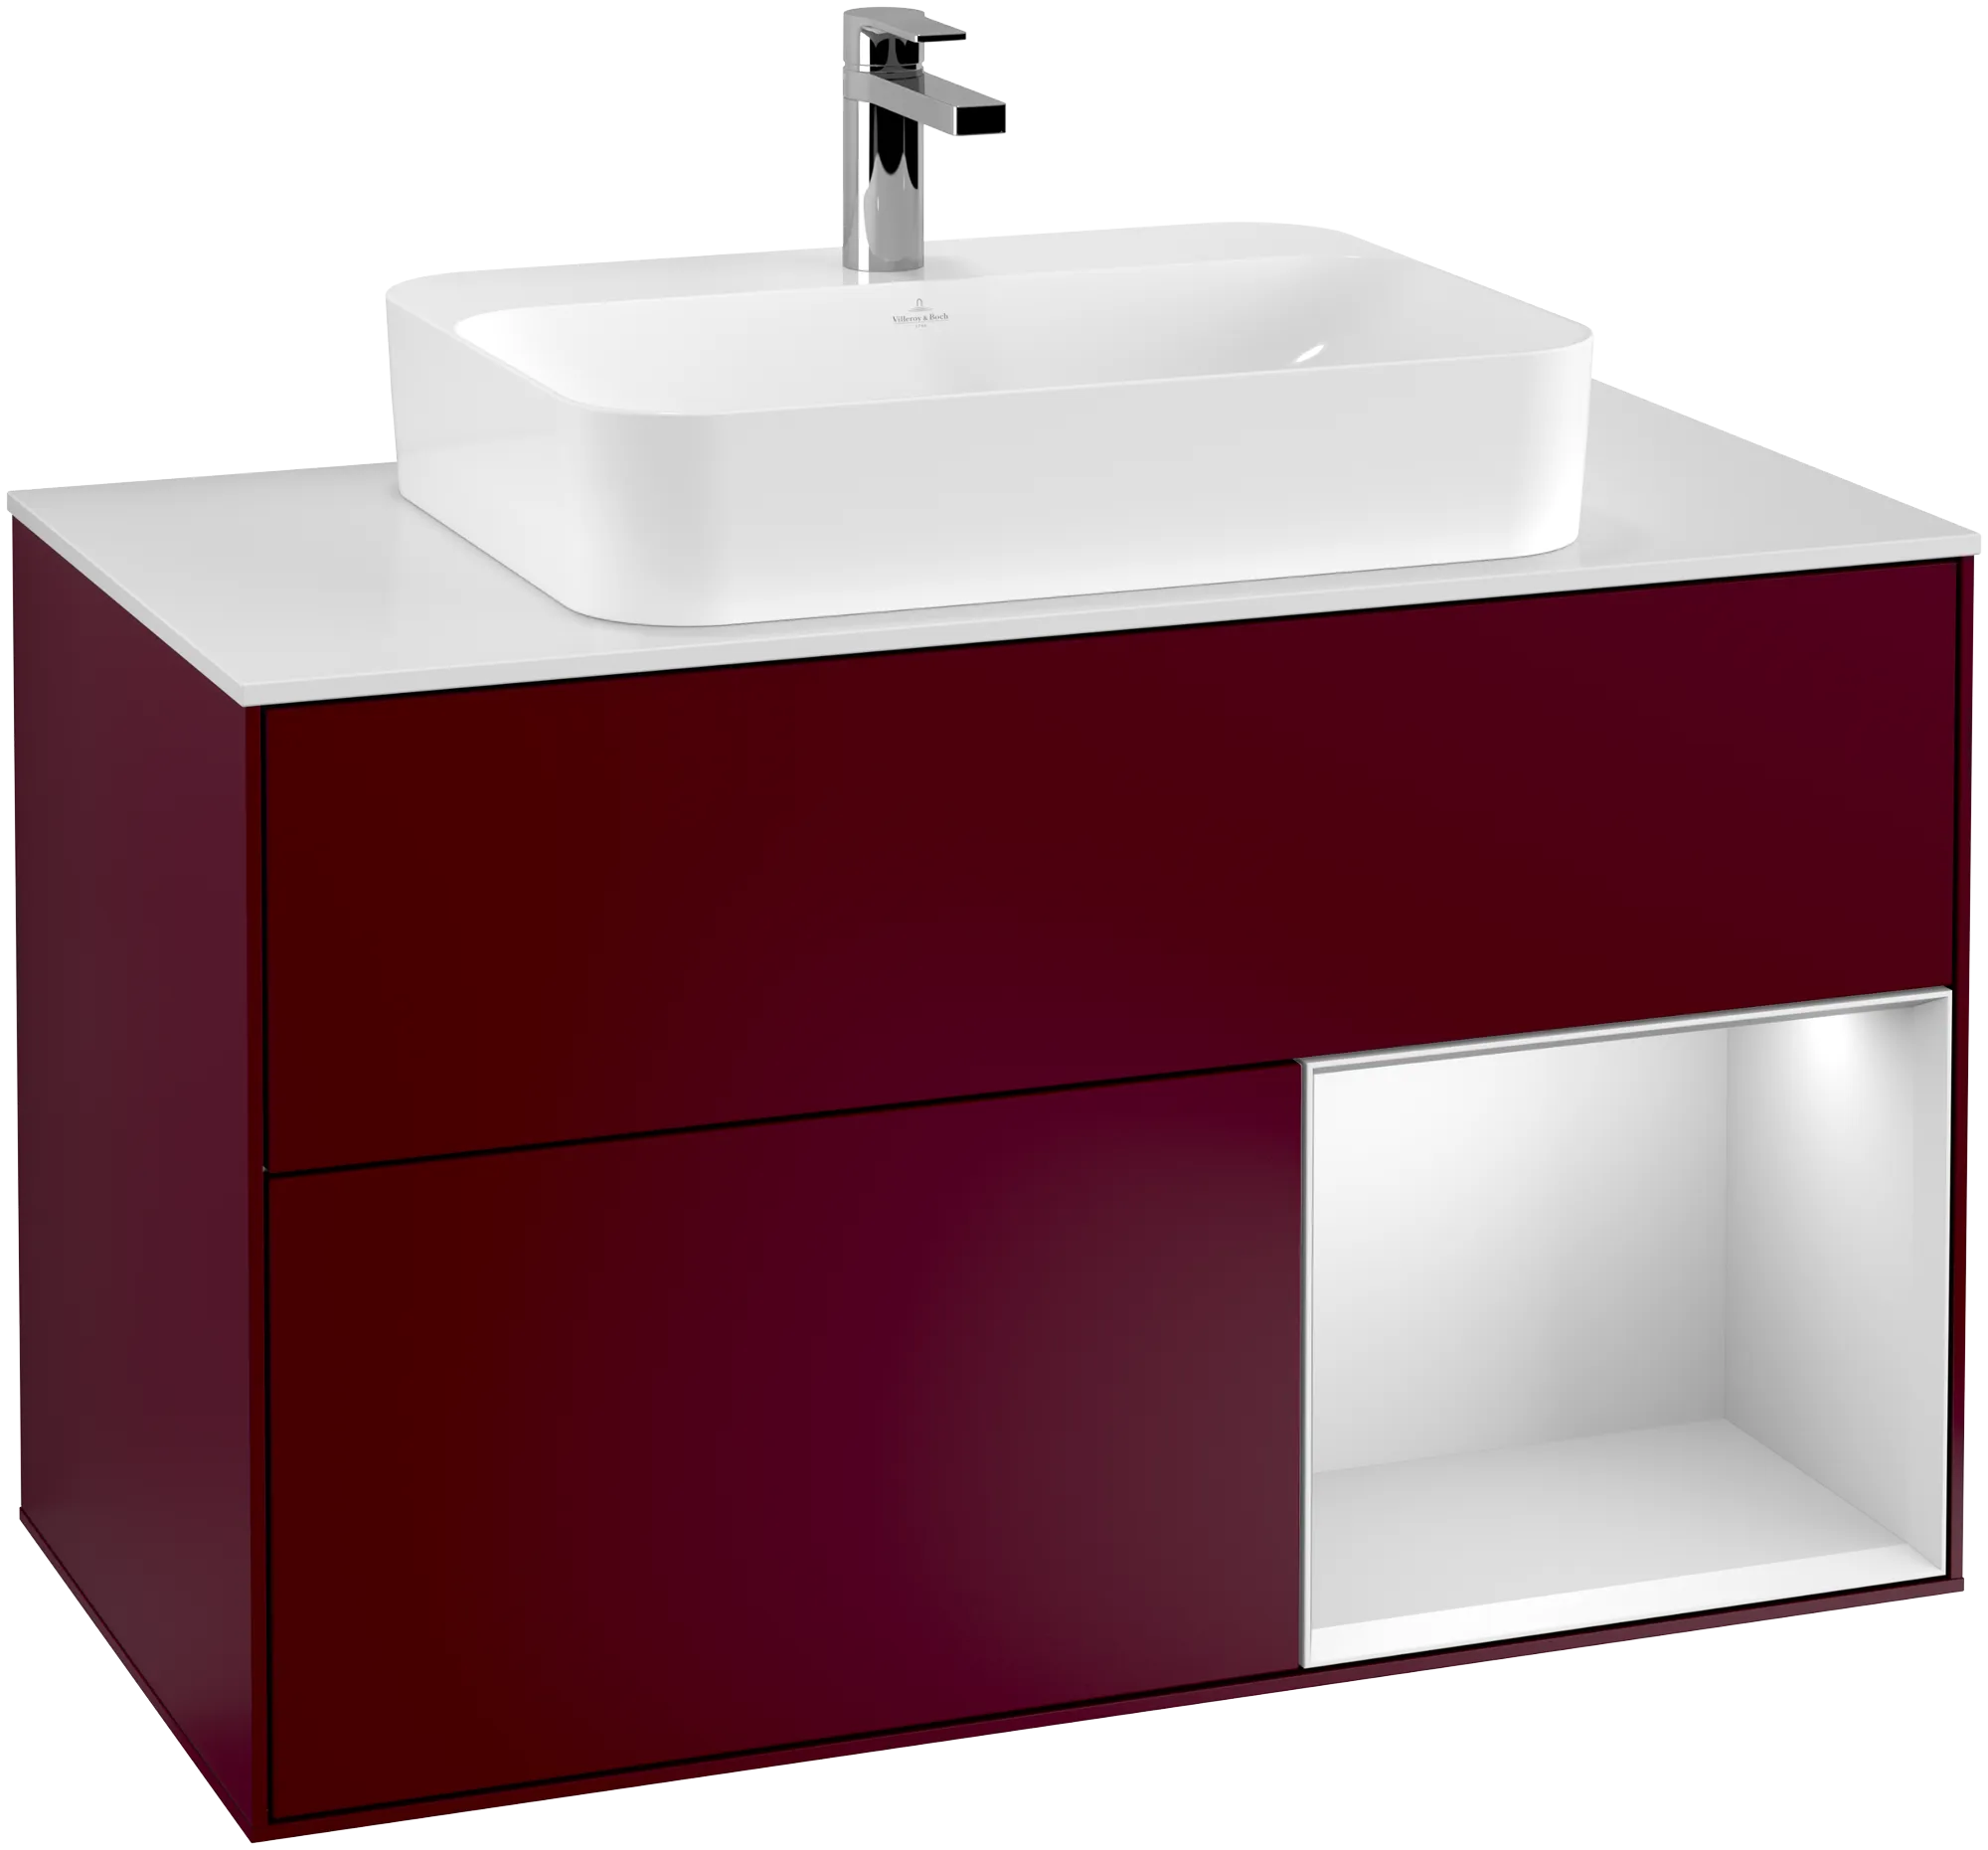 Picture of VILLEROY BOCH Finion Vanity unit, with lighting, 2 pull-out compartments, 1000 x 603 x 501 mm, Peony Matt Lacquer / White Matt Lacquer / Glass White Matt #G371MTHB